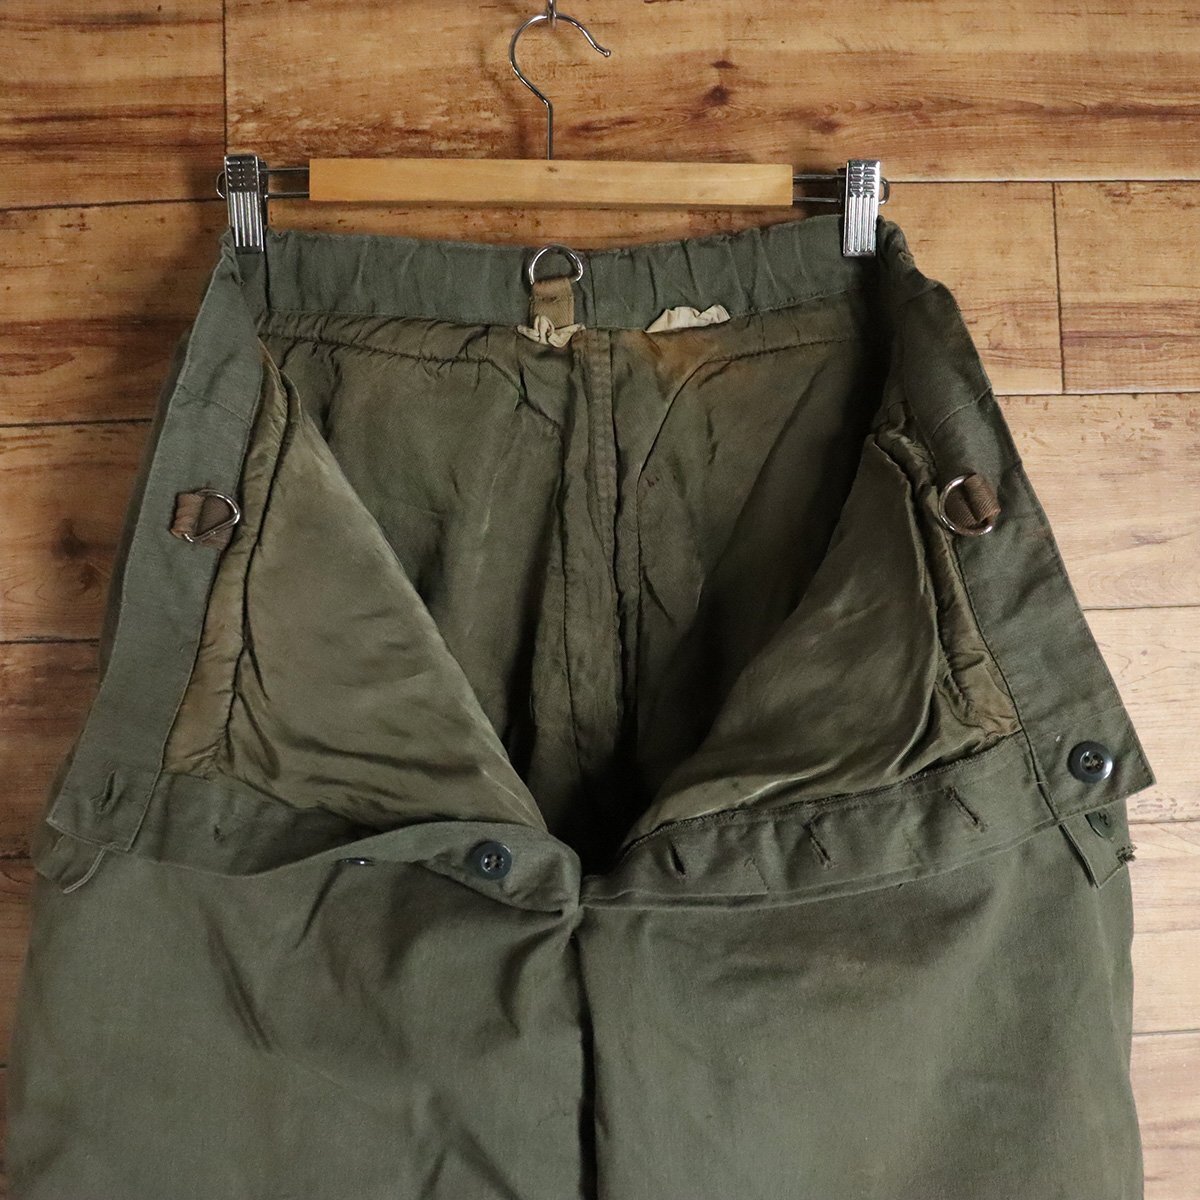 G9S/R3.20-1 Germany army cold weather pants with cotton cargo pants field pants german military euro Vintage 